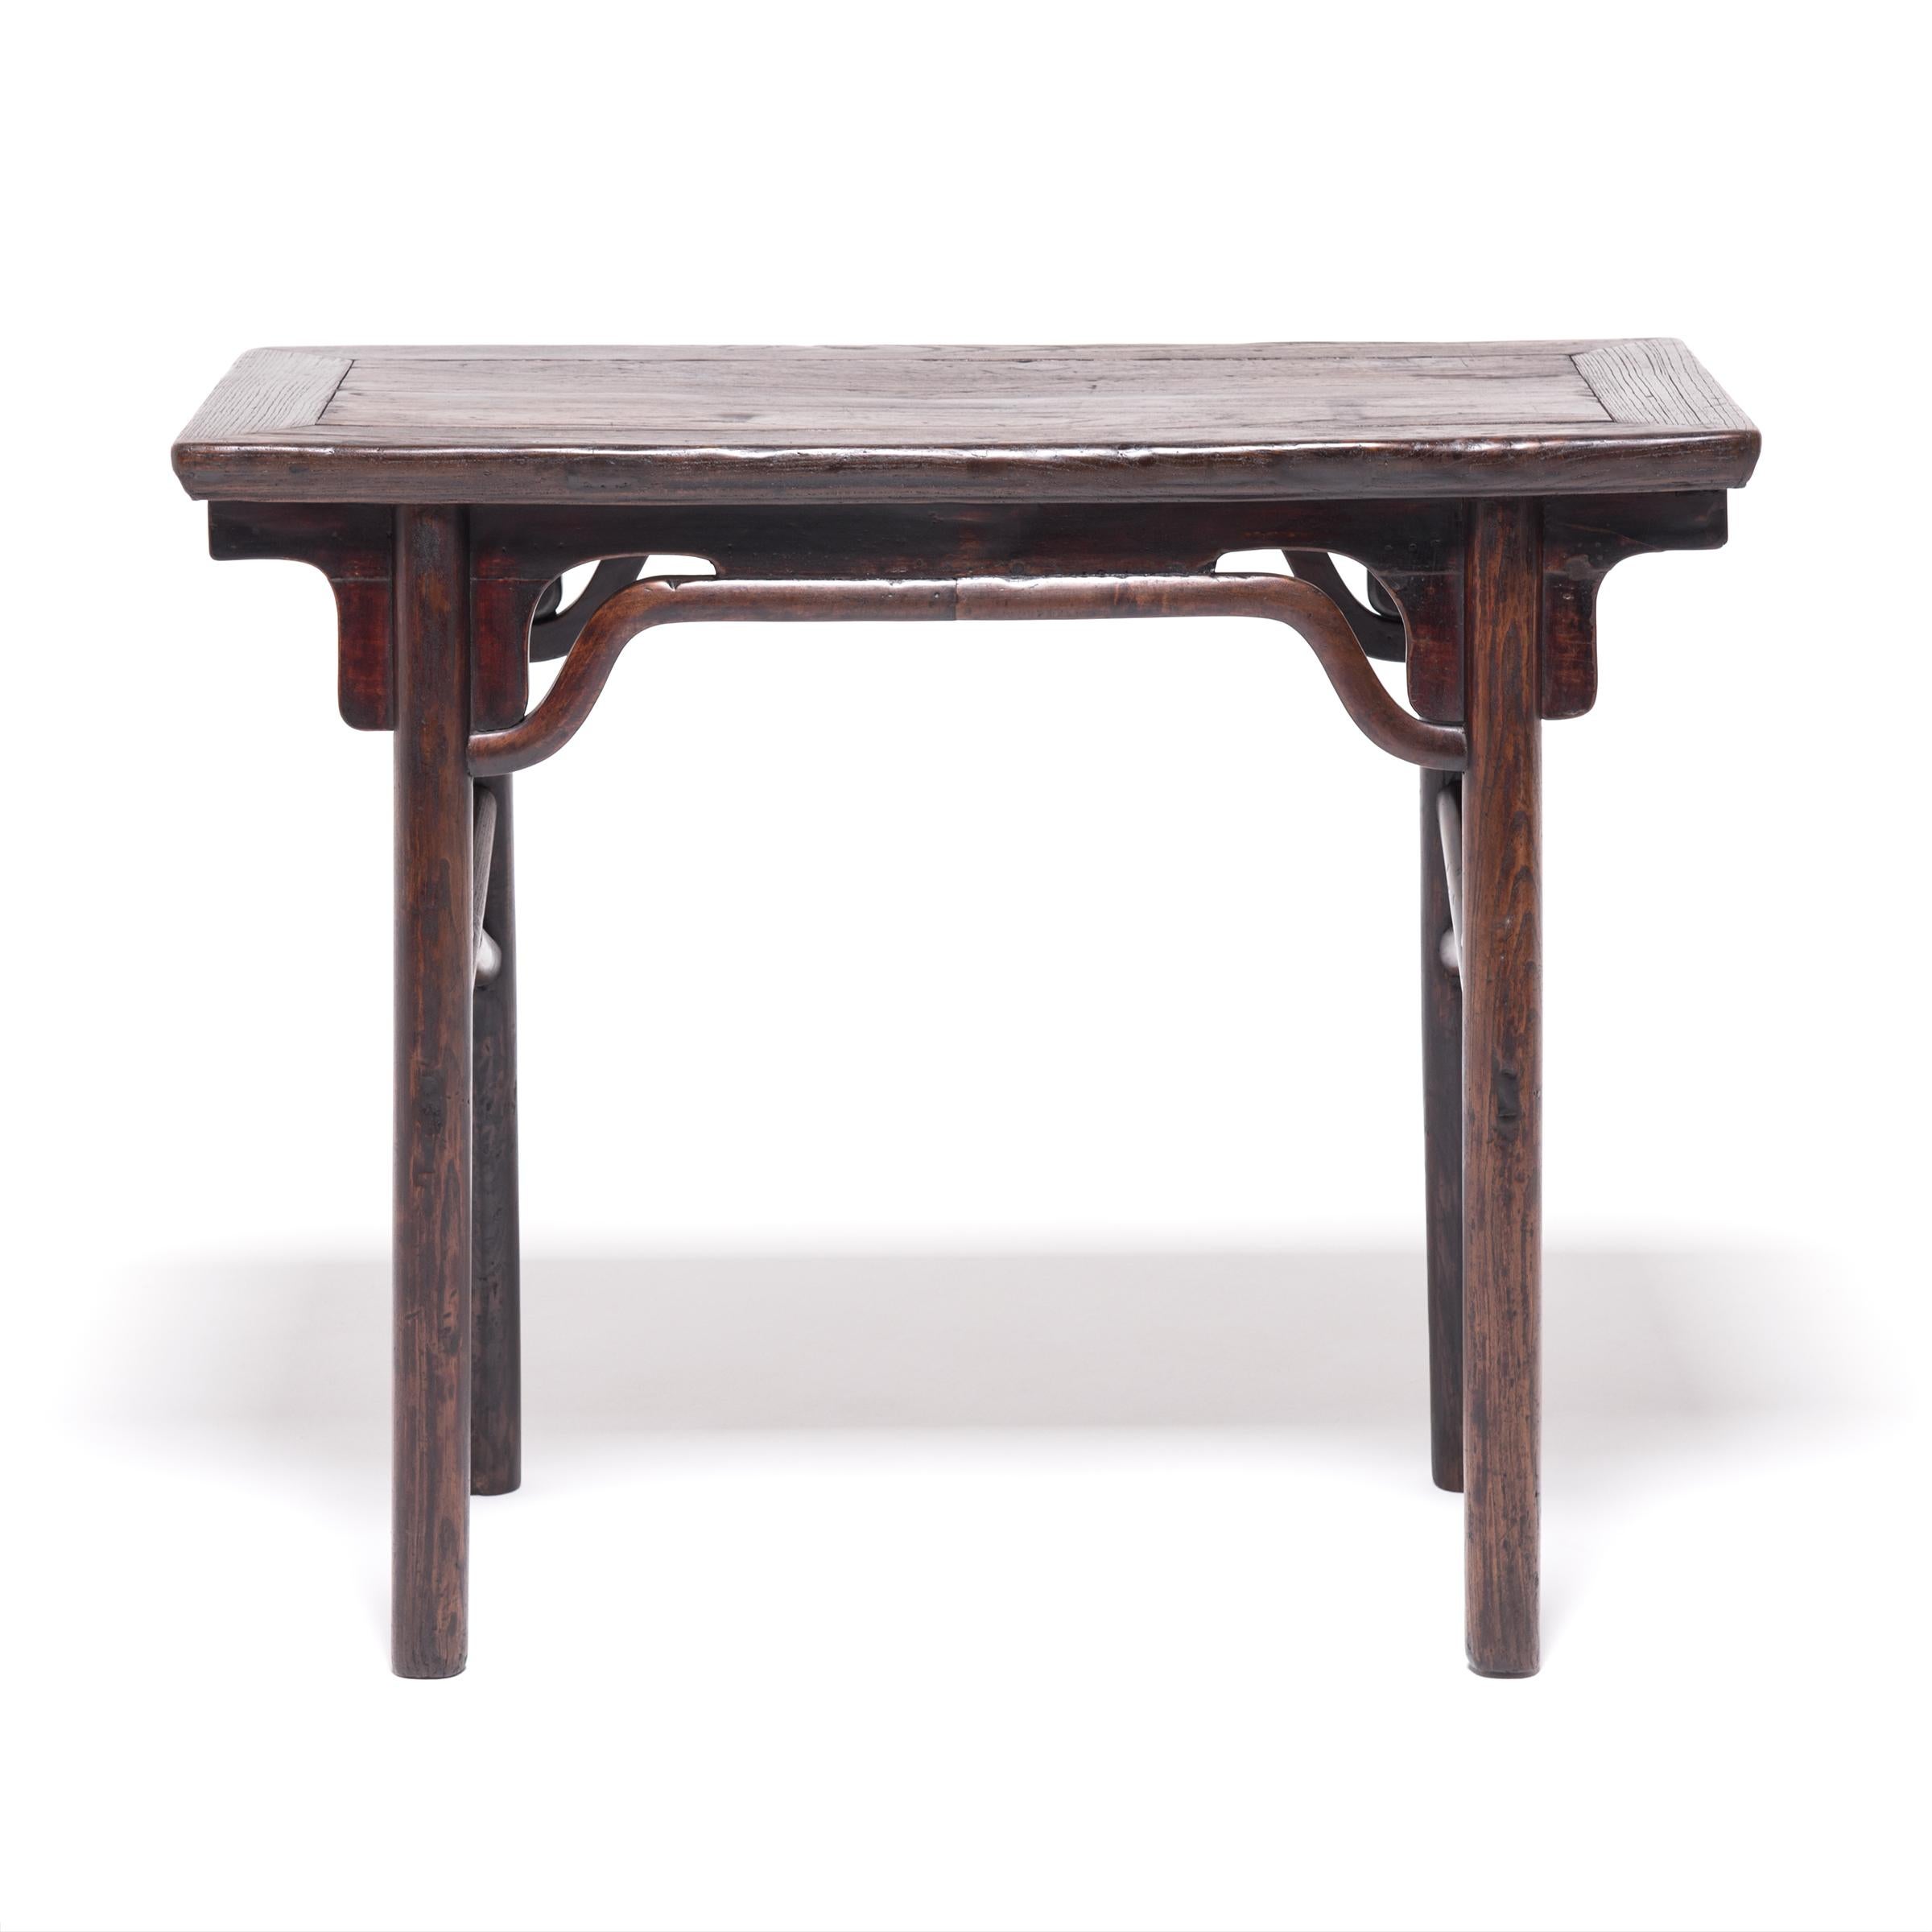 Crossed stretcher bars and apron curves animate the square profile of this elmwood table. Made in Hebei province circa 1850, the beautifully preserved table was used for sharing wine and spirits. Imbibers would gather around the table and engage in